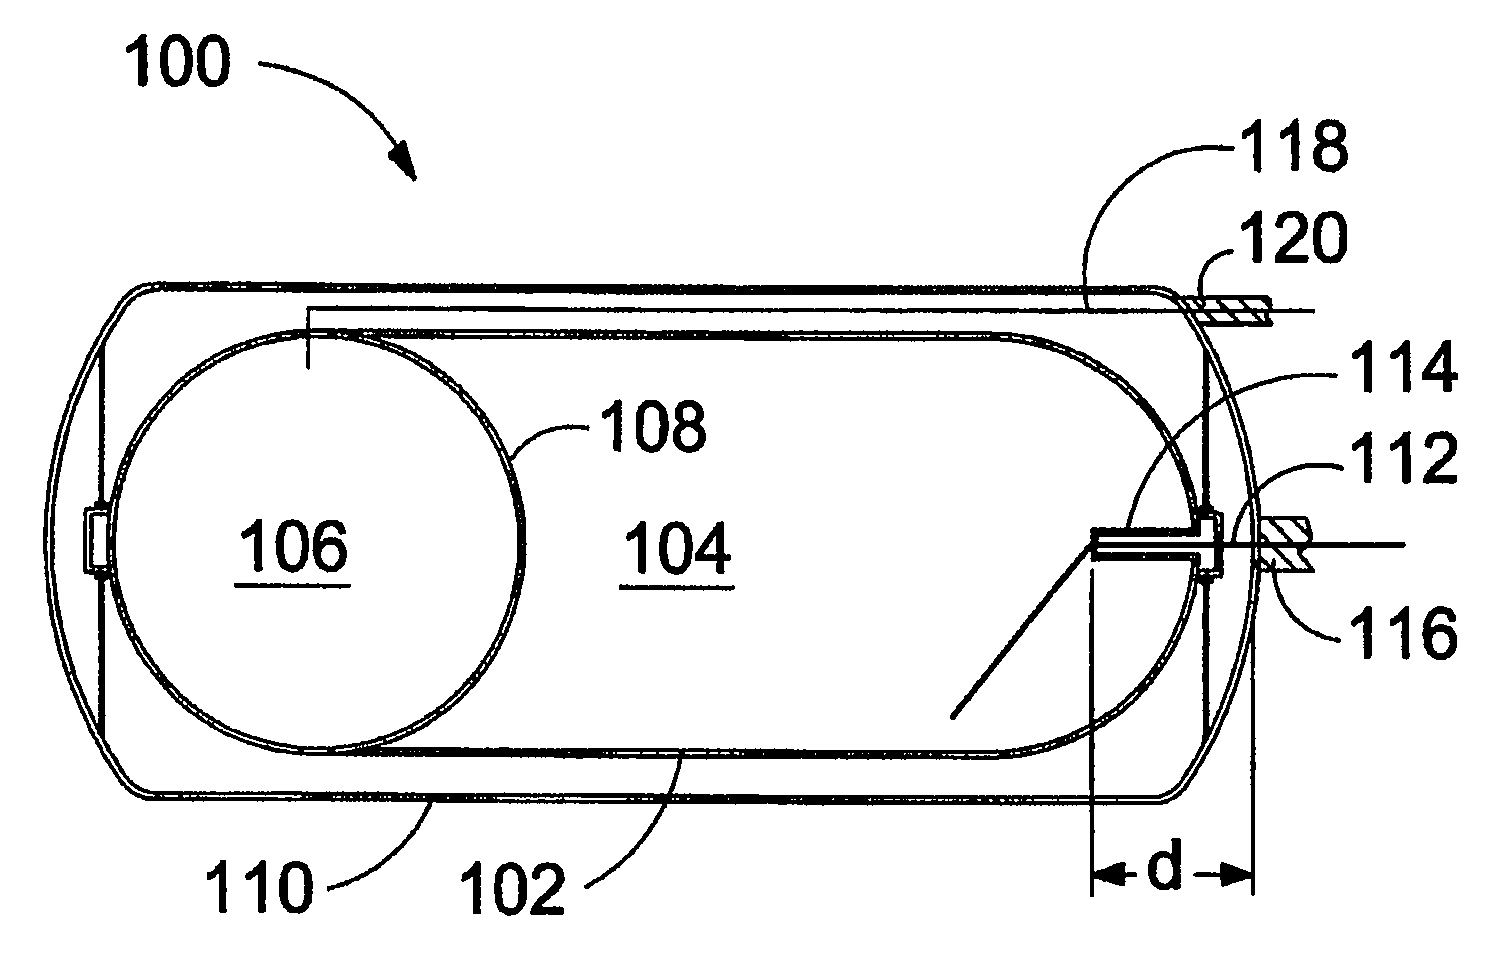 Multi-fuel storage system and method of storing fuel in a multi-fuel storage system